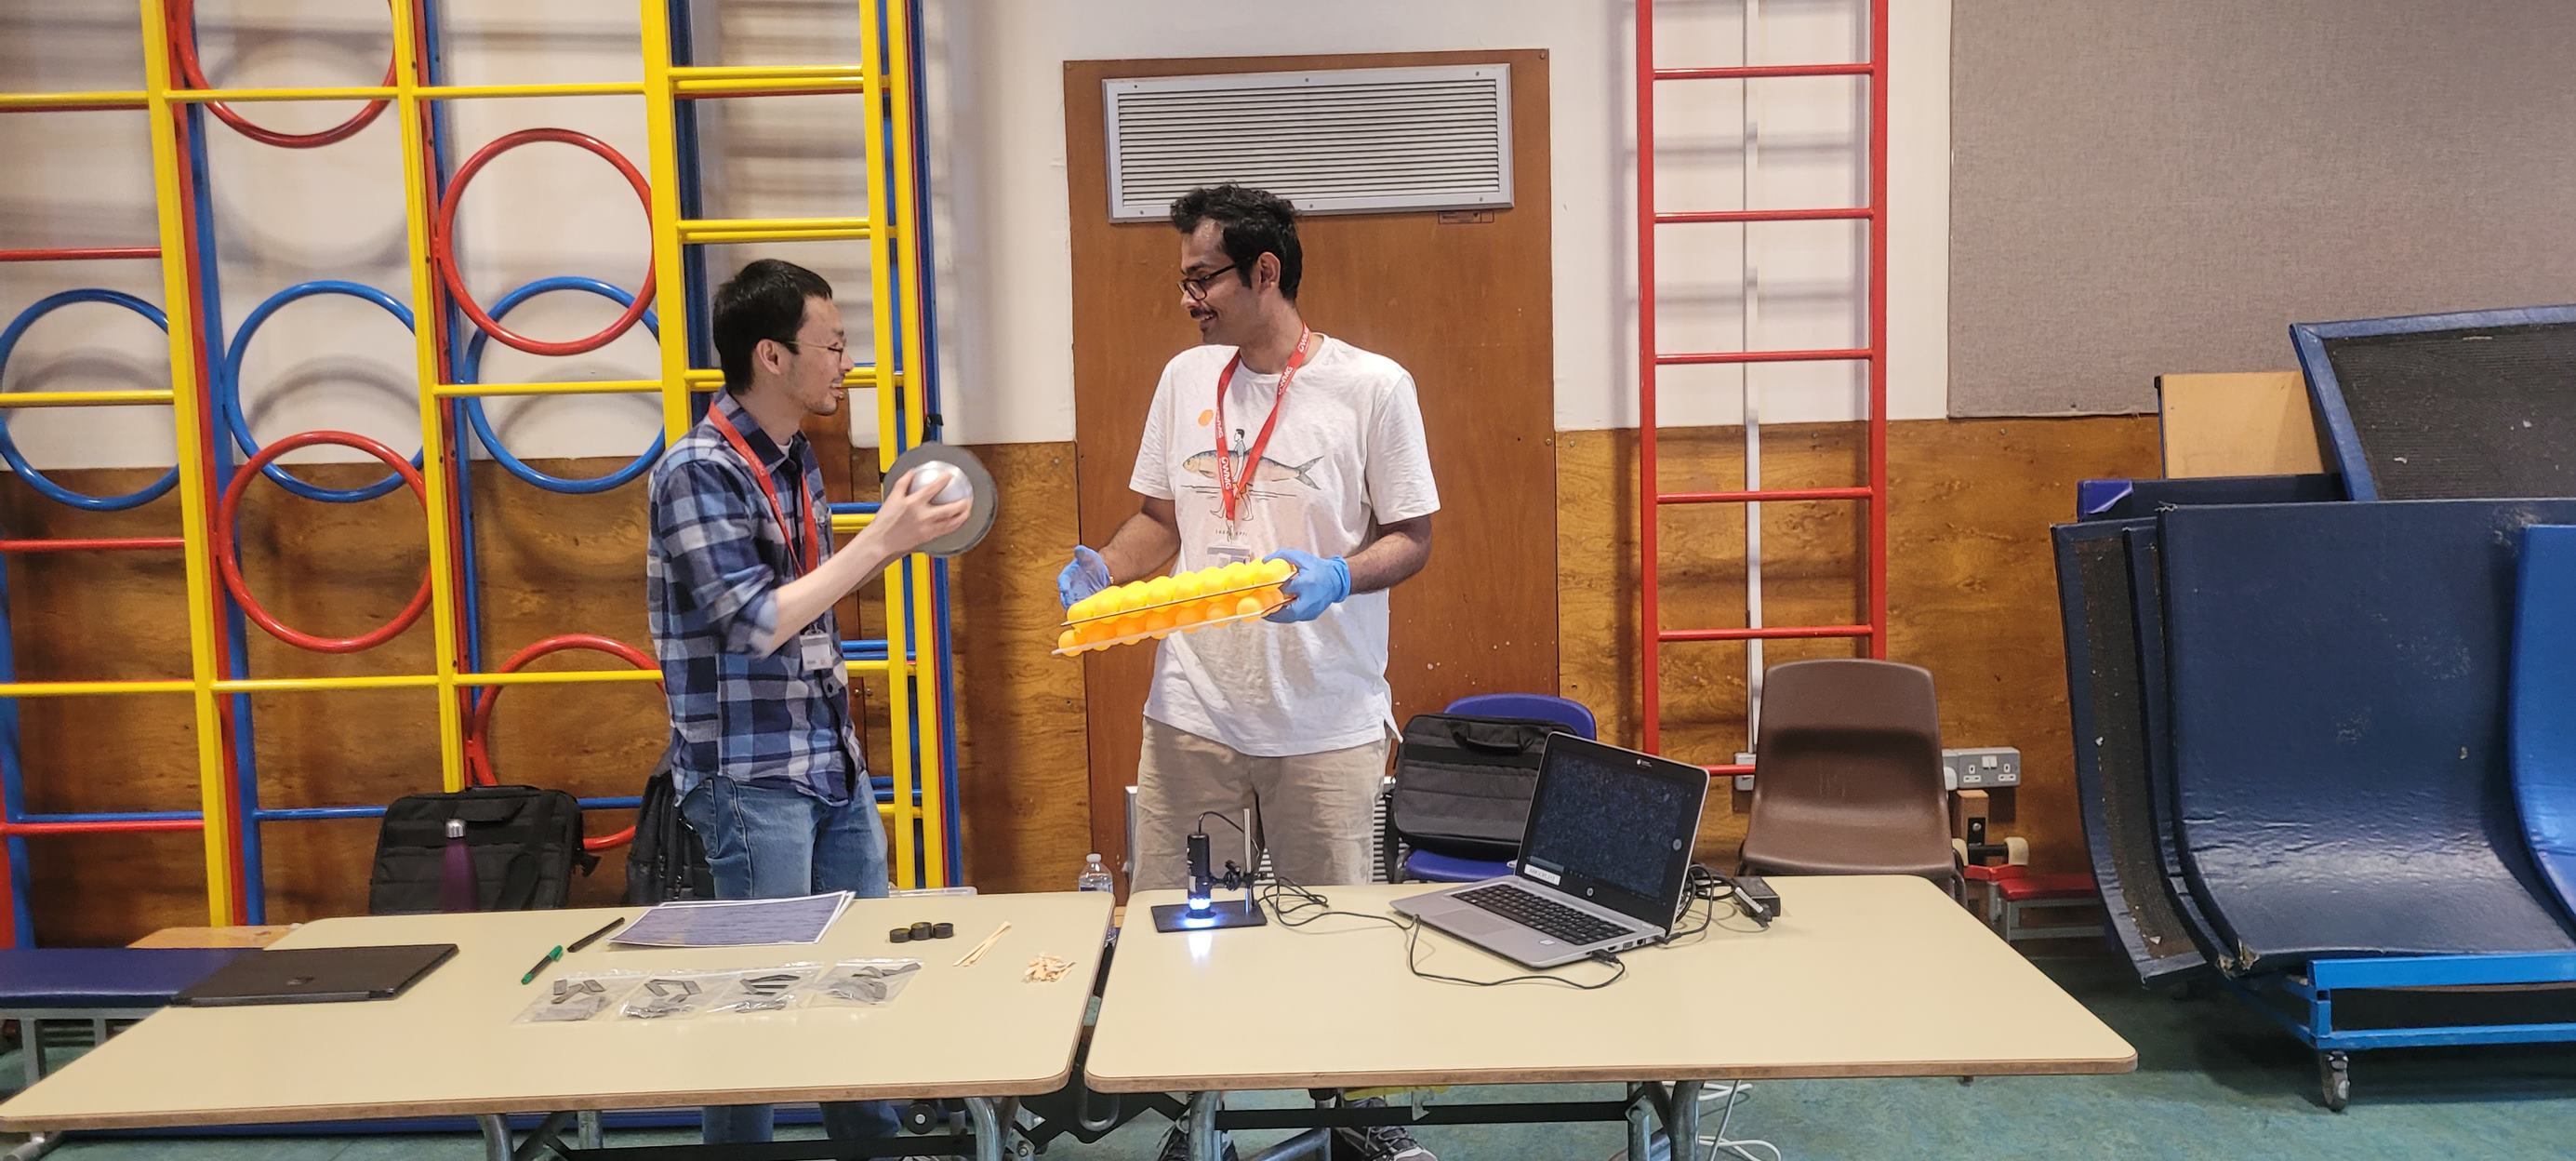 Two people in a school hall.  One person is holding an experiment and showing it to the other person. 